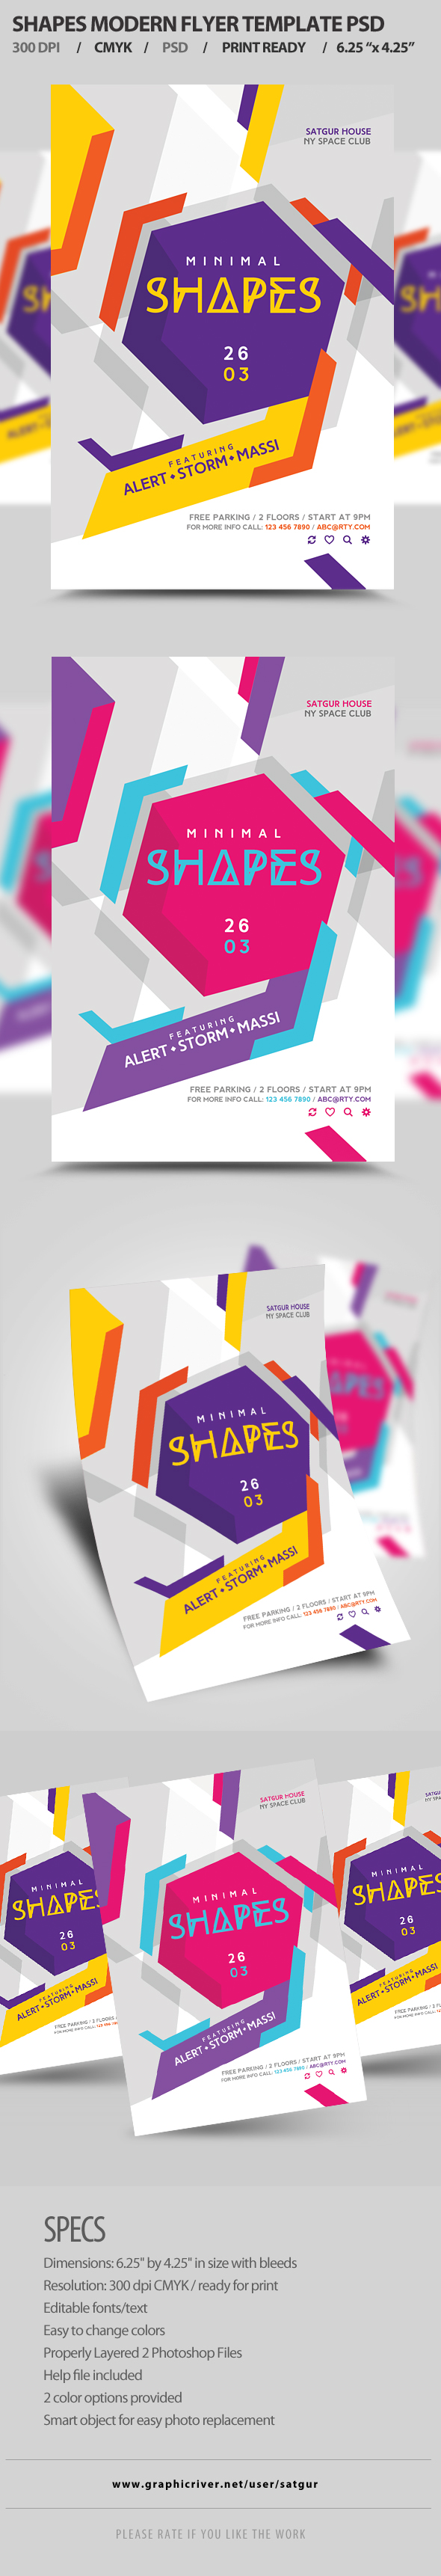 Shapes Modern Party Flyer